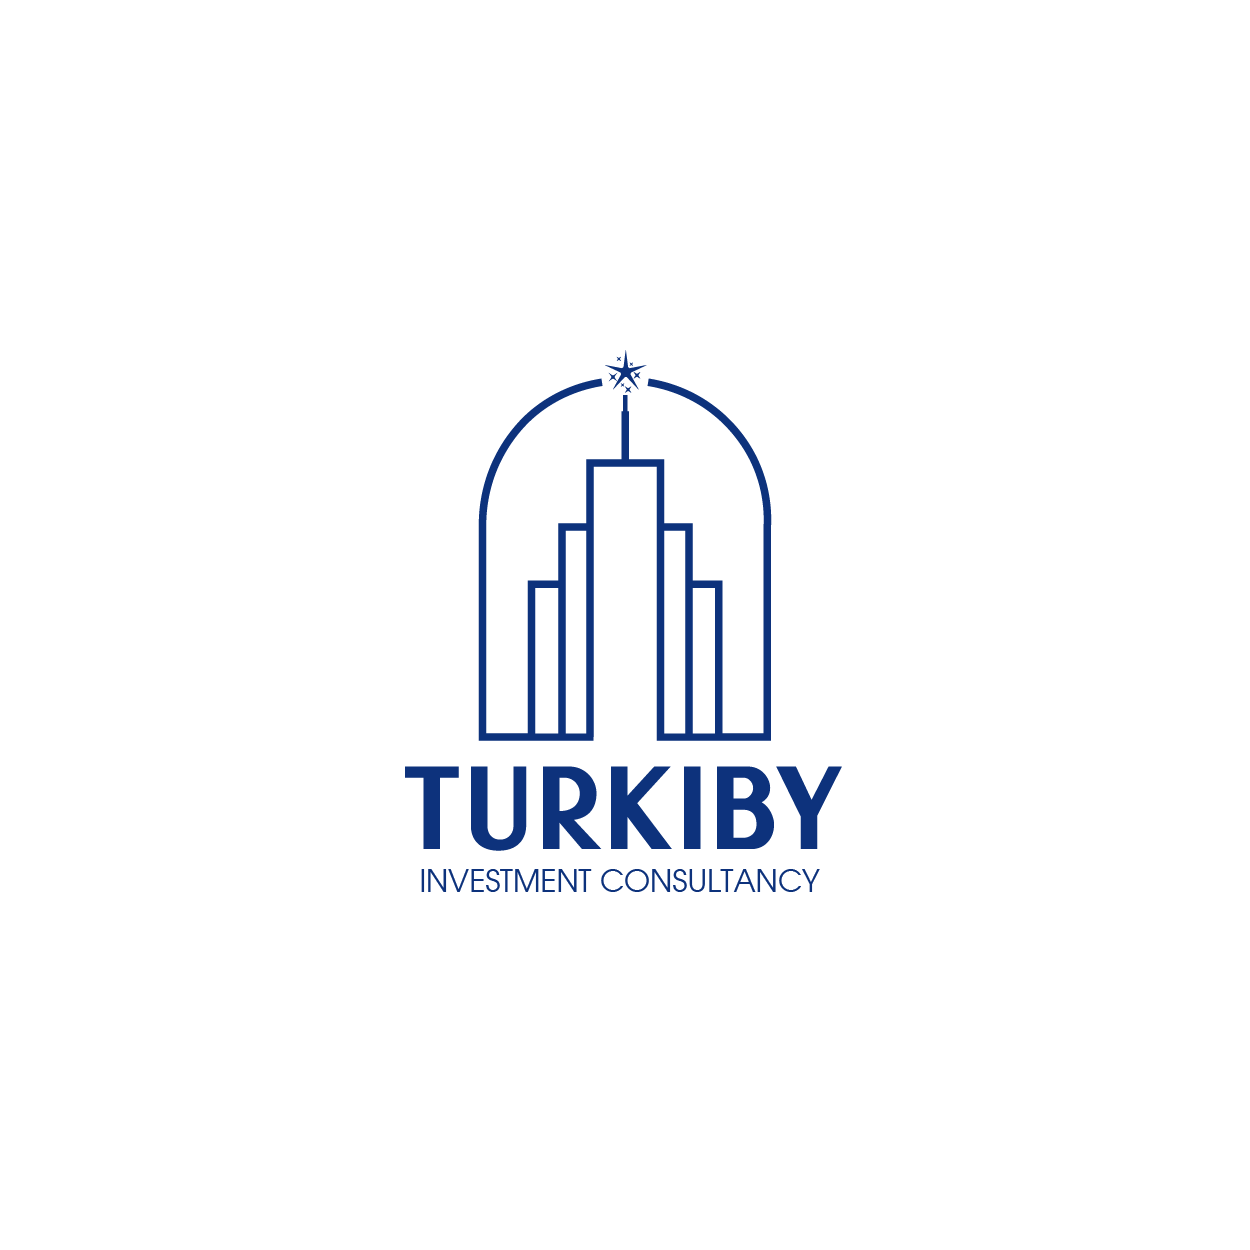 Turkiby Investment Consultancy